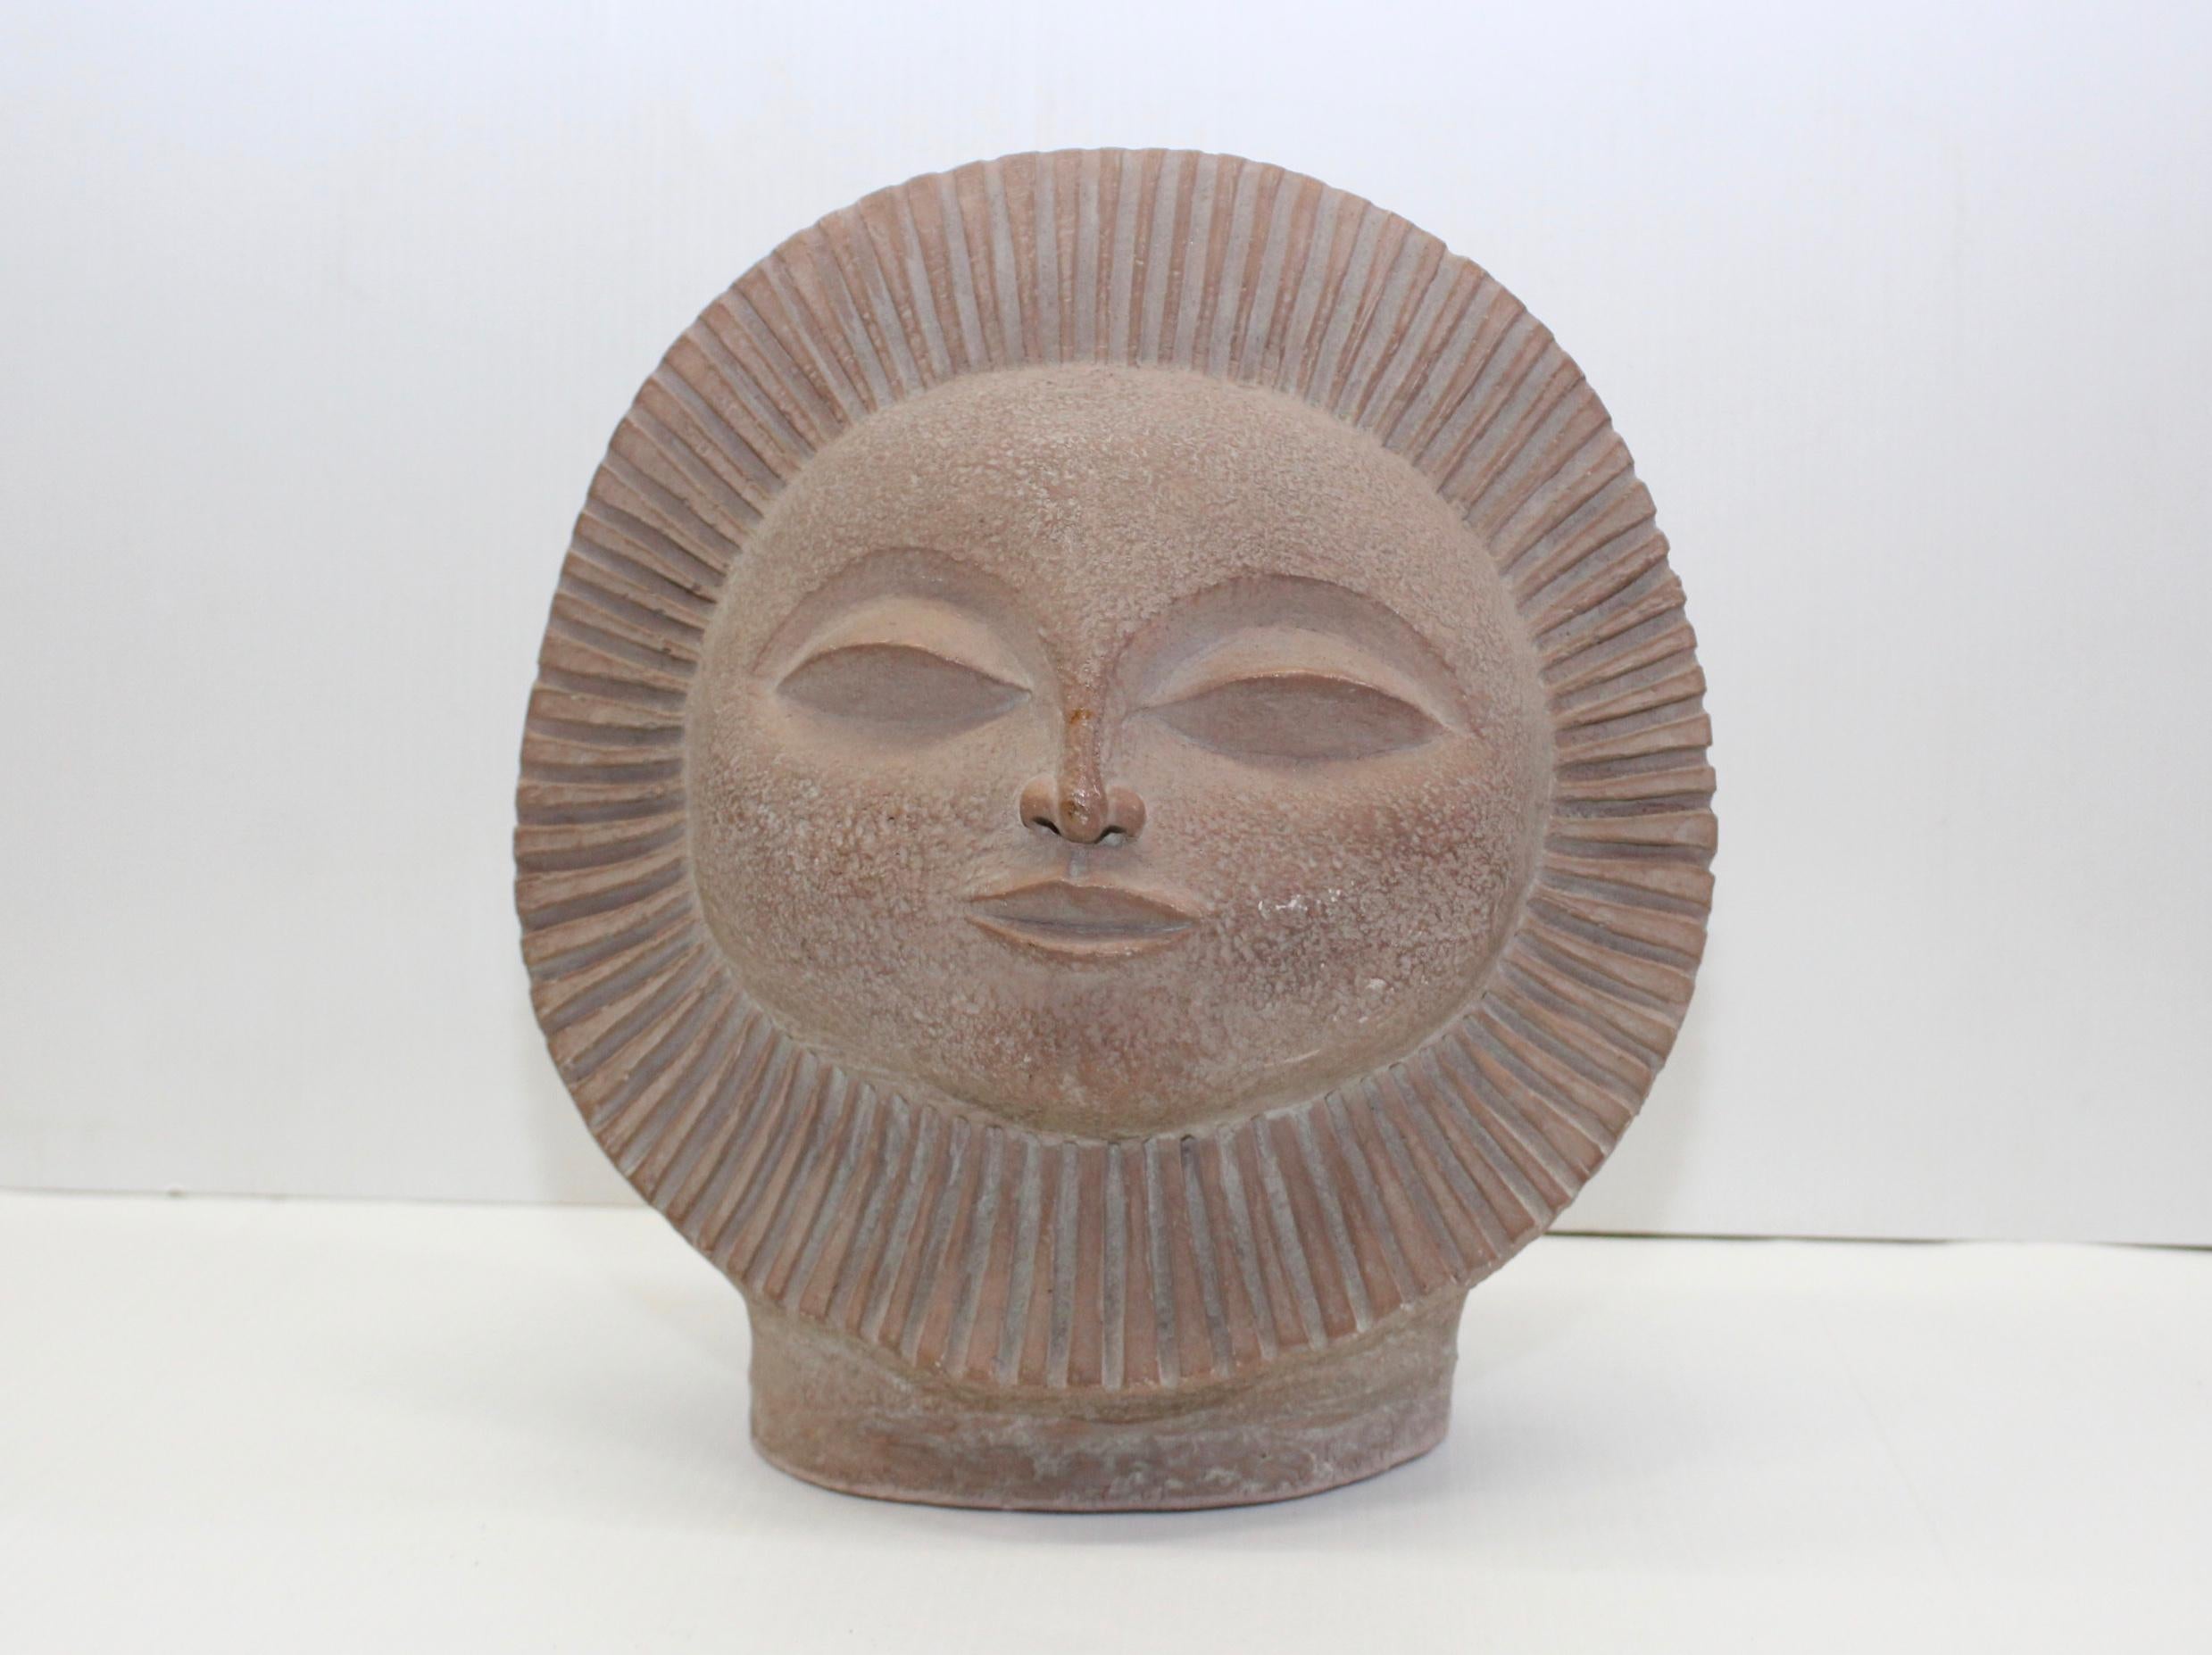 1968 Mid-Century Modern sun sculpture designed by Paul Bellardo for Austin Productions, in vintage original condition with minor wear and patina.